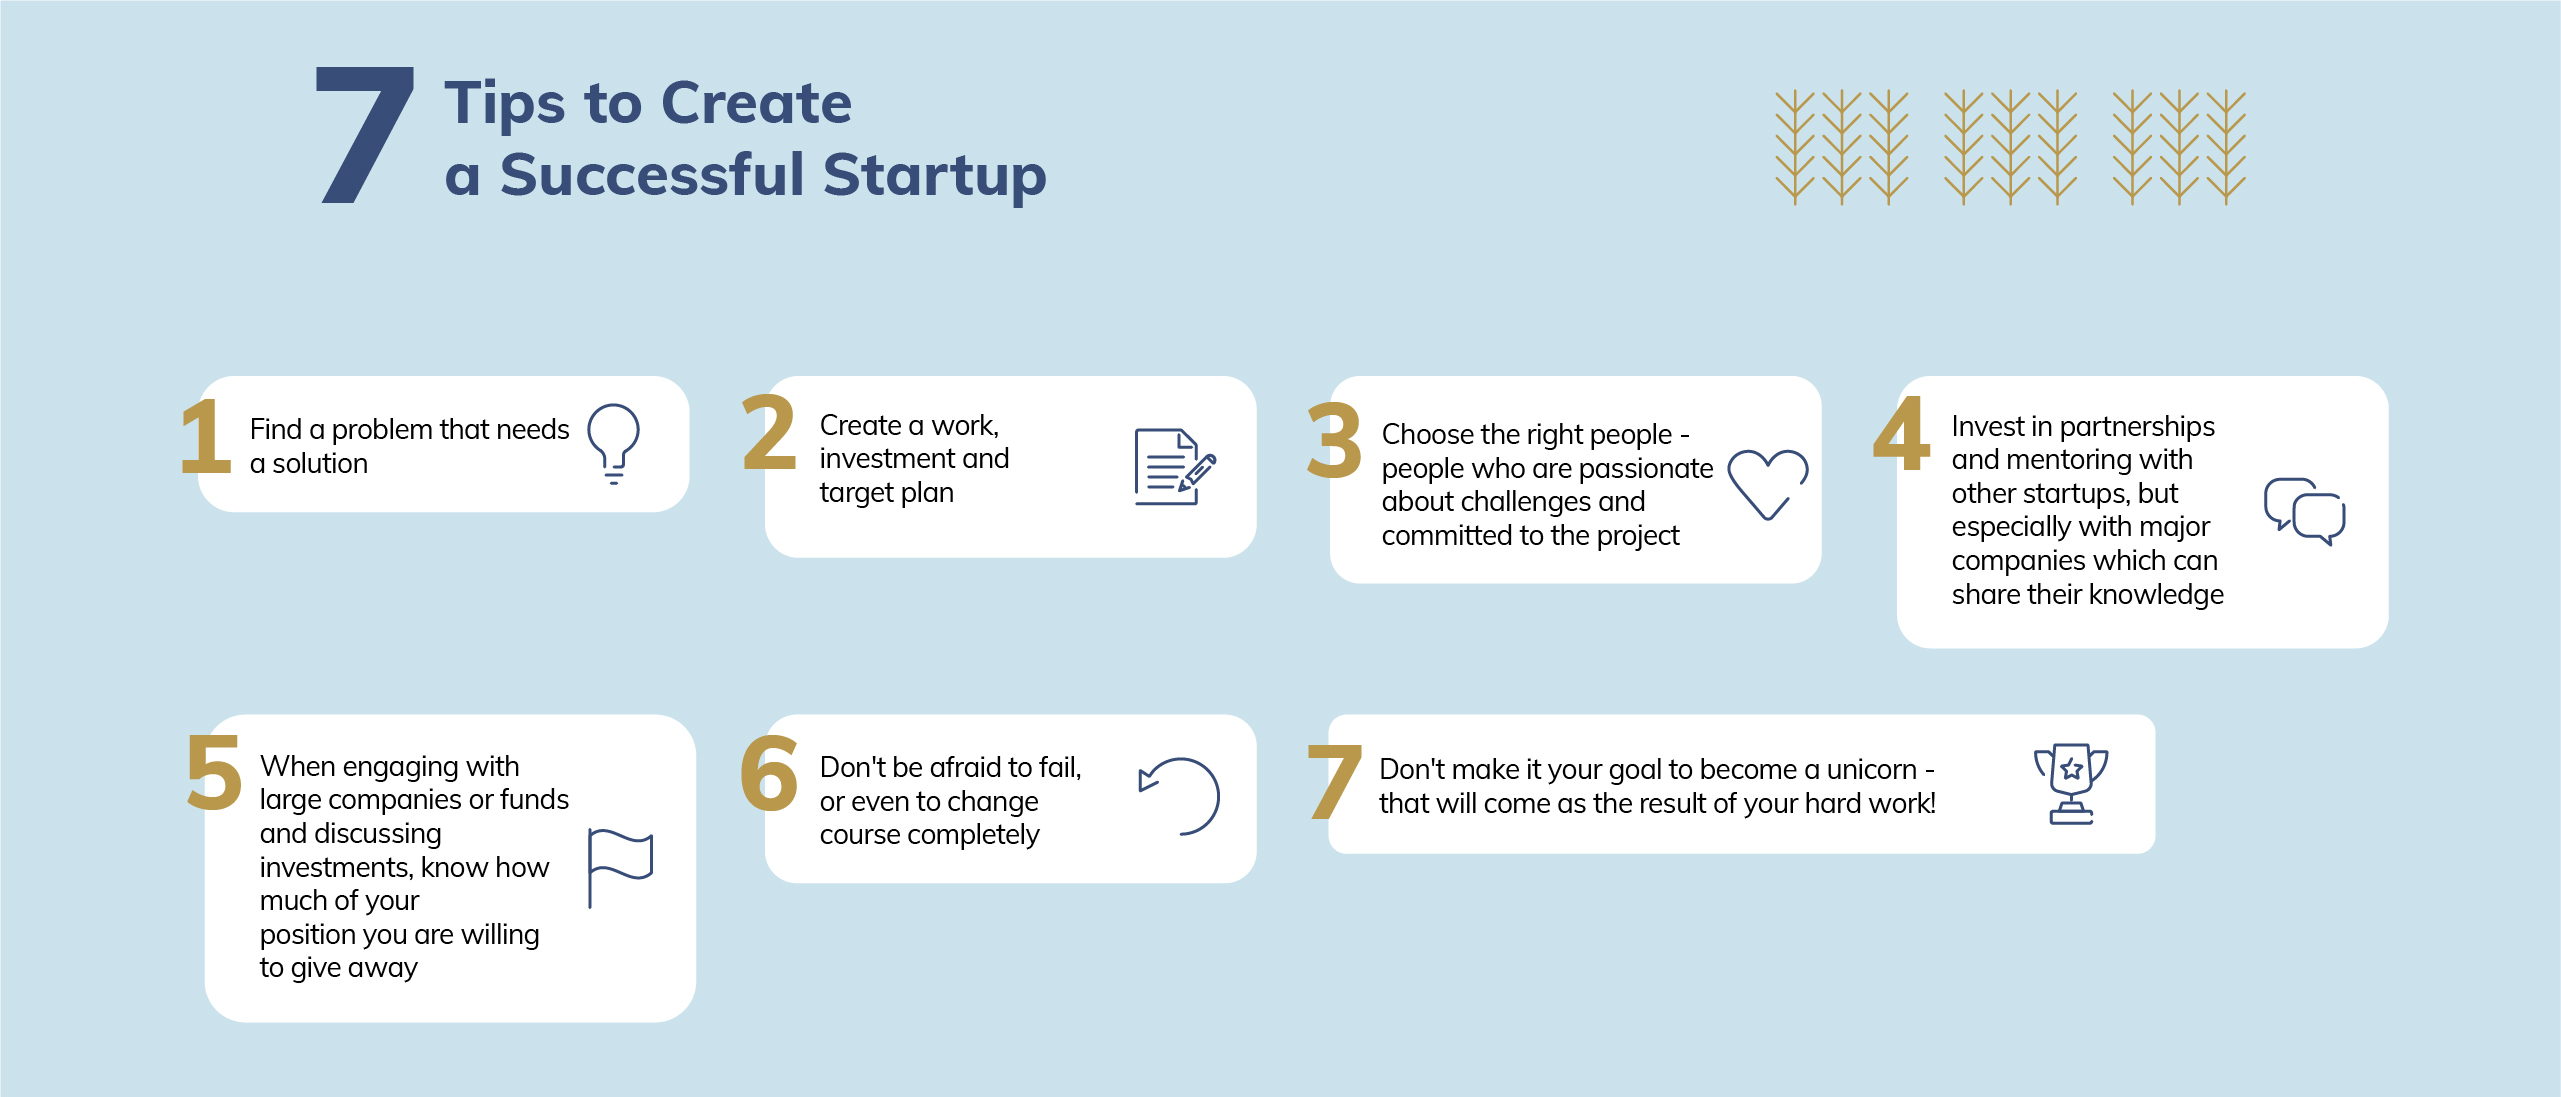 7 tips to create a successful startup